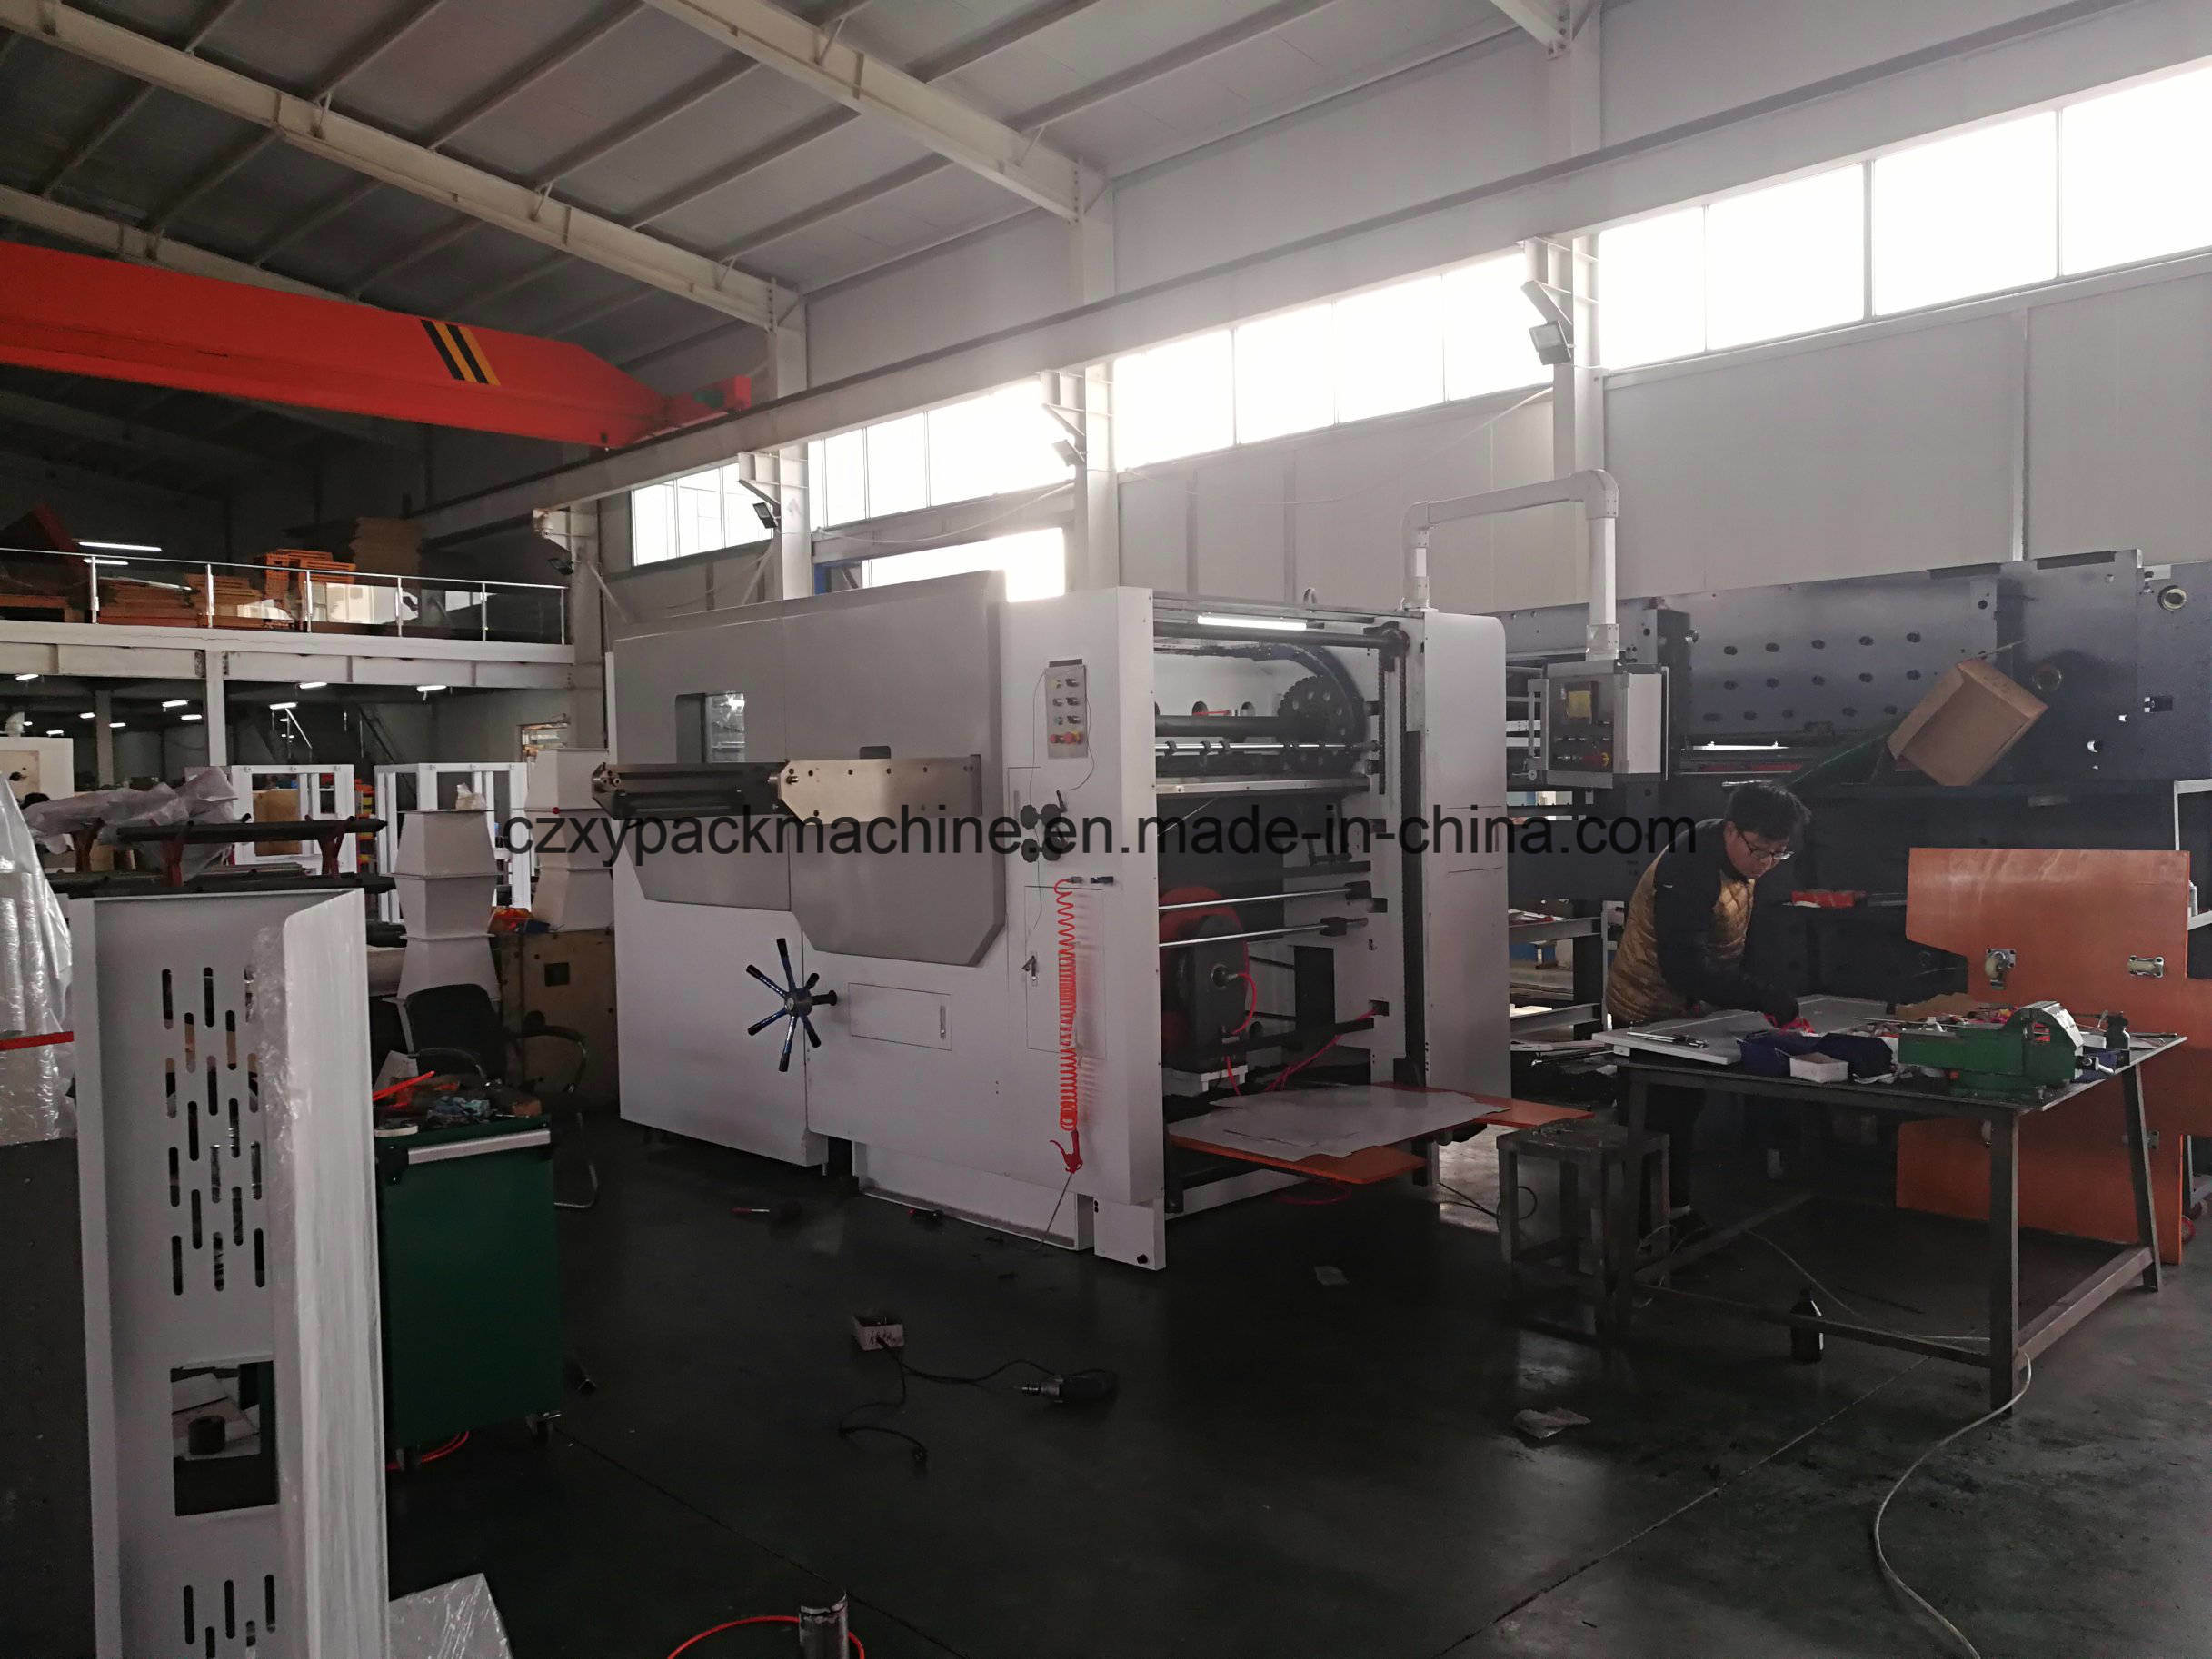 2018 New Product Automatic Flat Die Cutting Machine with Stripping